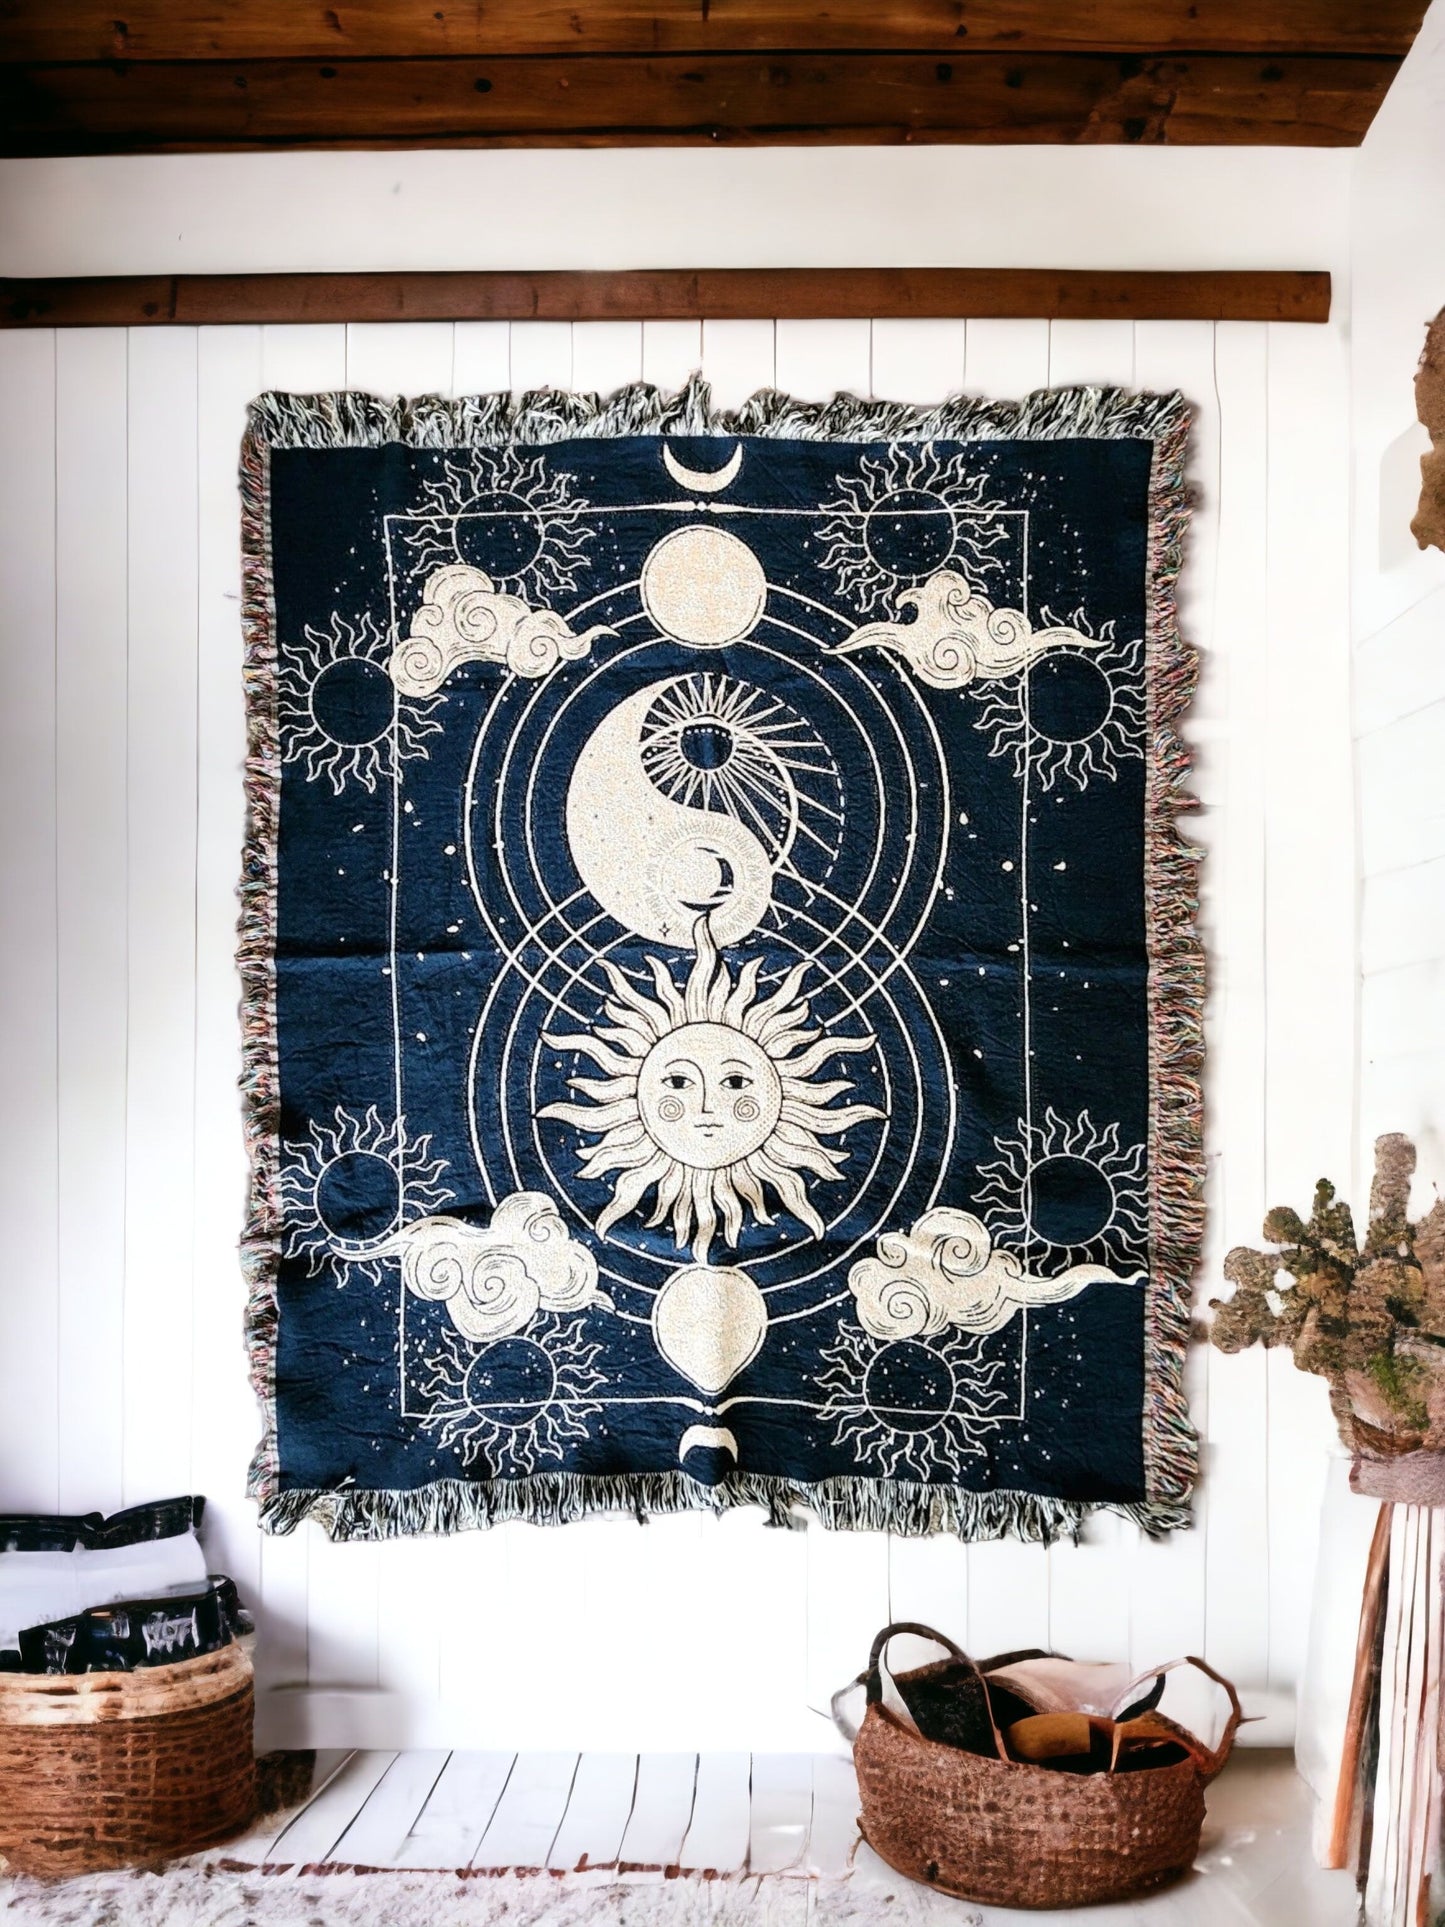 Luna and Sol Decorative Woven Blanket Hanging on White Wall